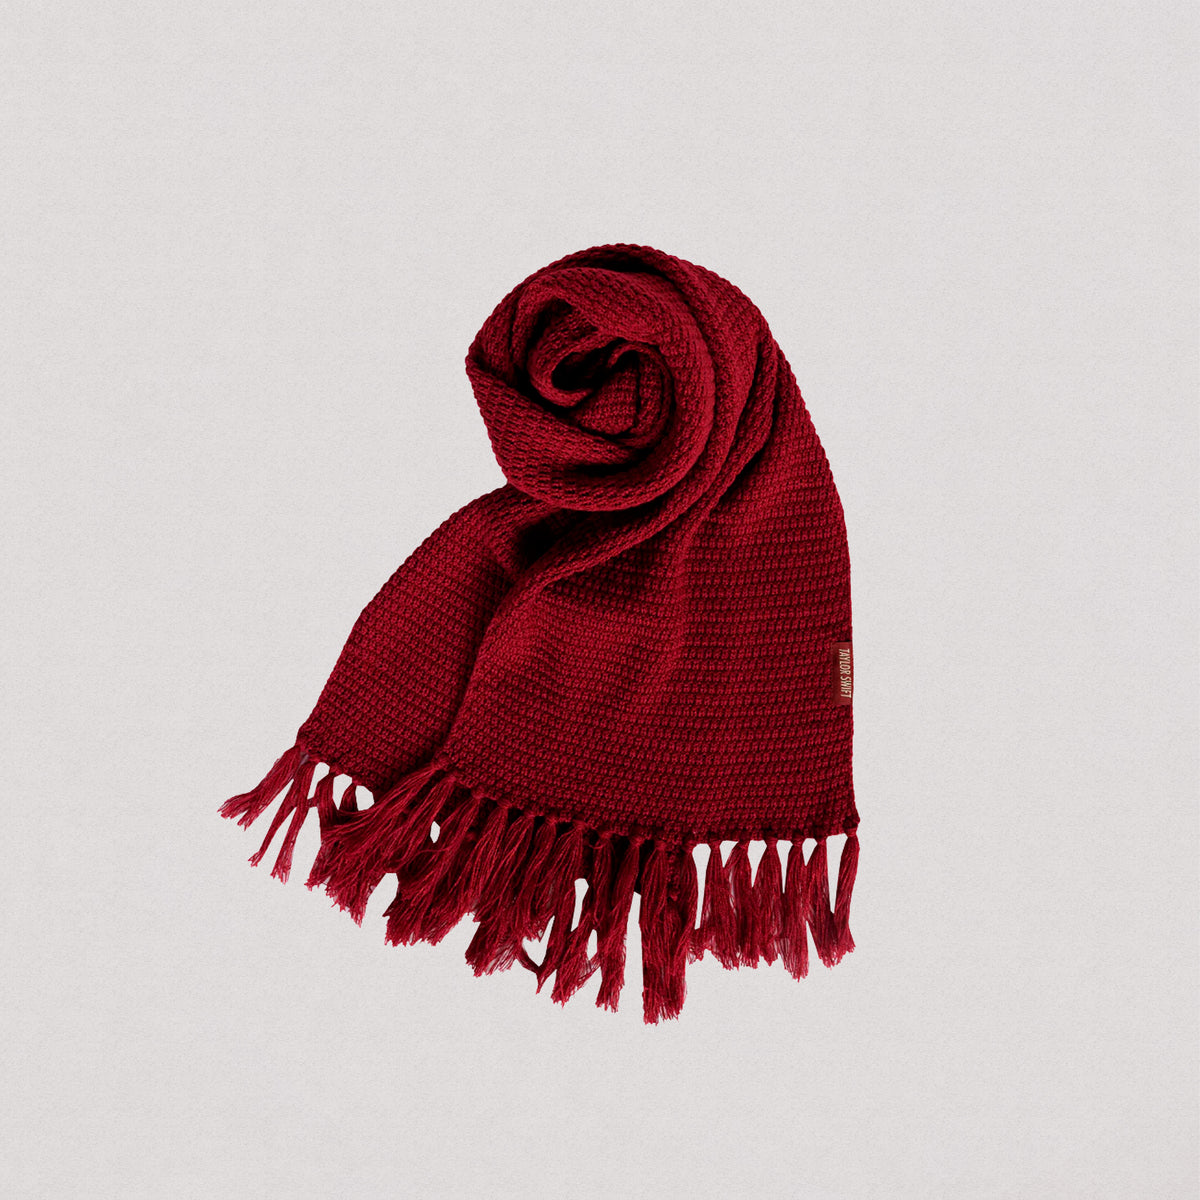 Taylor Swift - RED "Taylor's Version" (The All Too Well Knit Scarf)